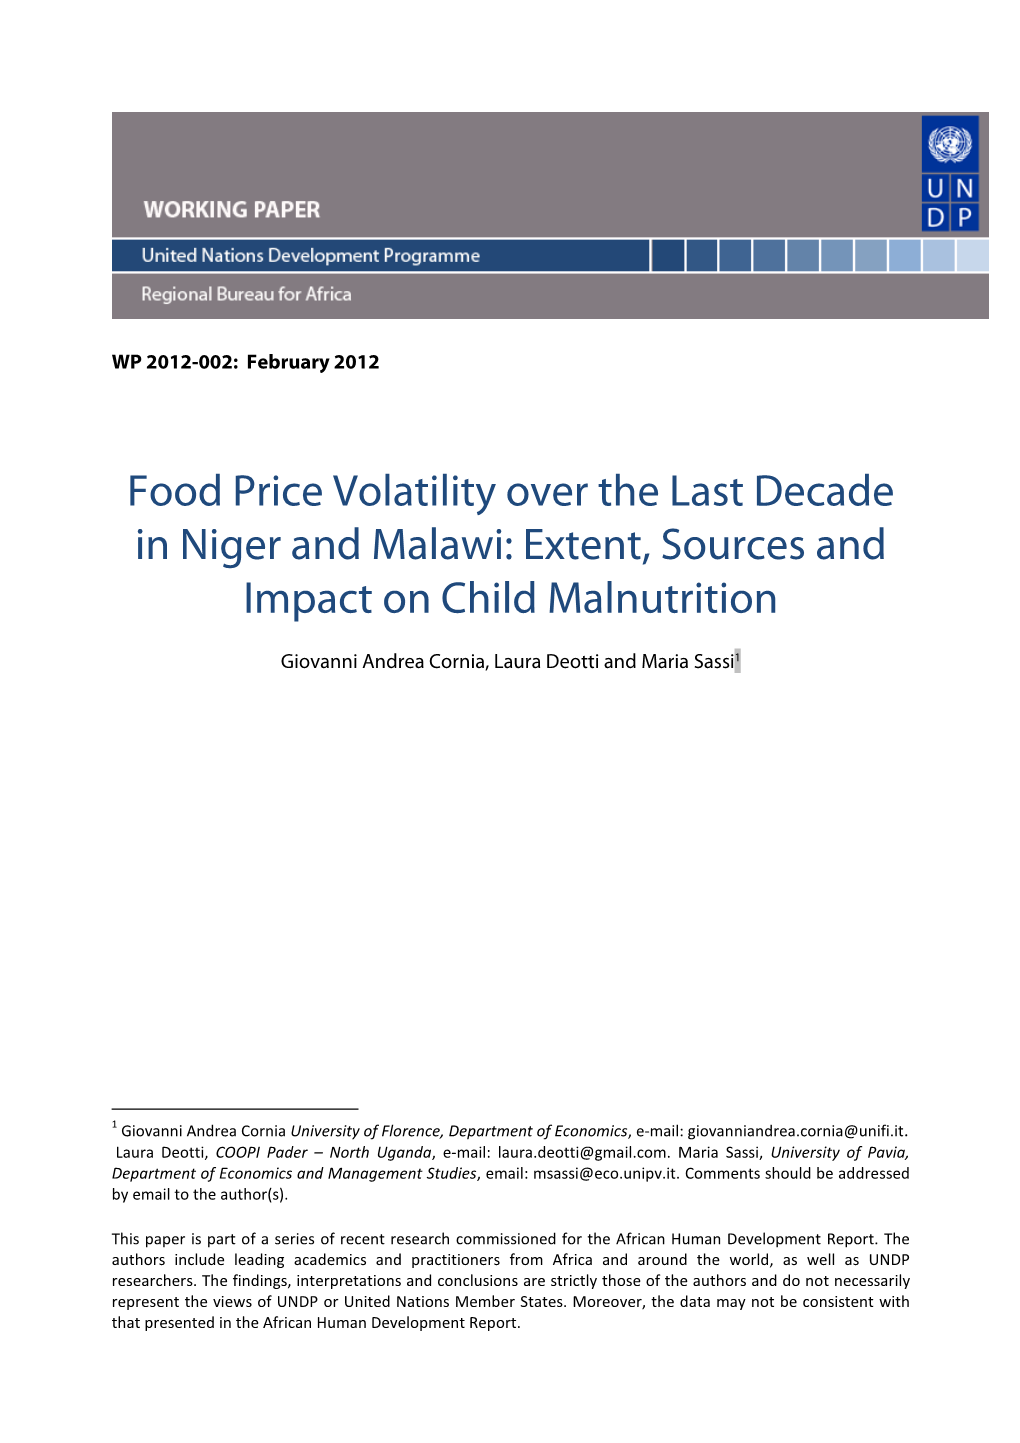 Food Price Volatility Over the Last Decade in Niger and Malawi: Extent, Sources and Impact on Child Malnutrition